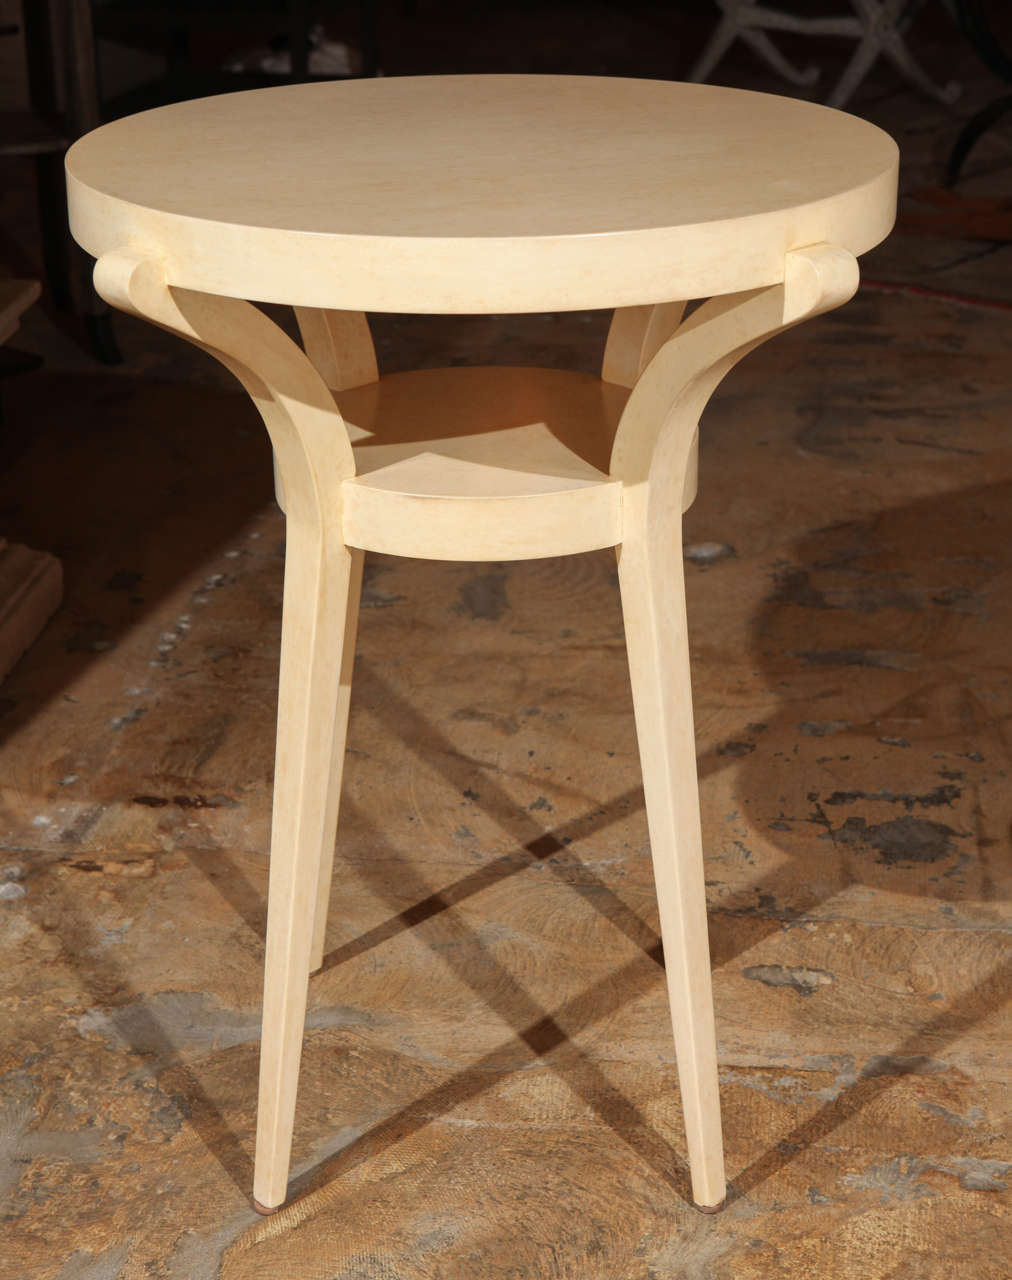 Modern restored sculptural side table in faux painted parchment finish over wood.
